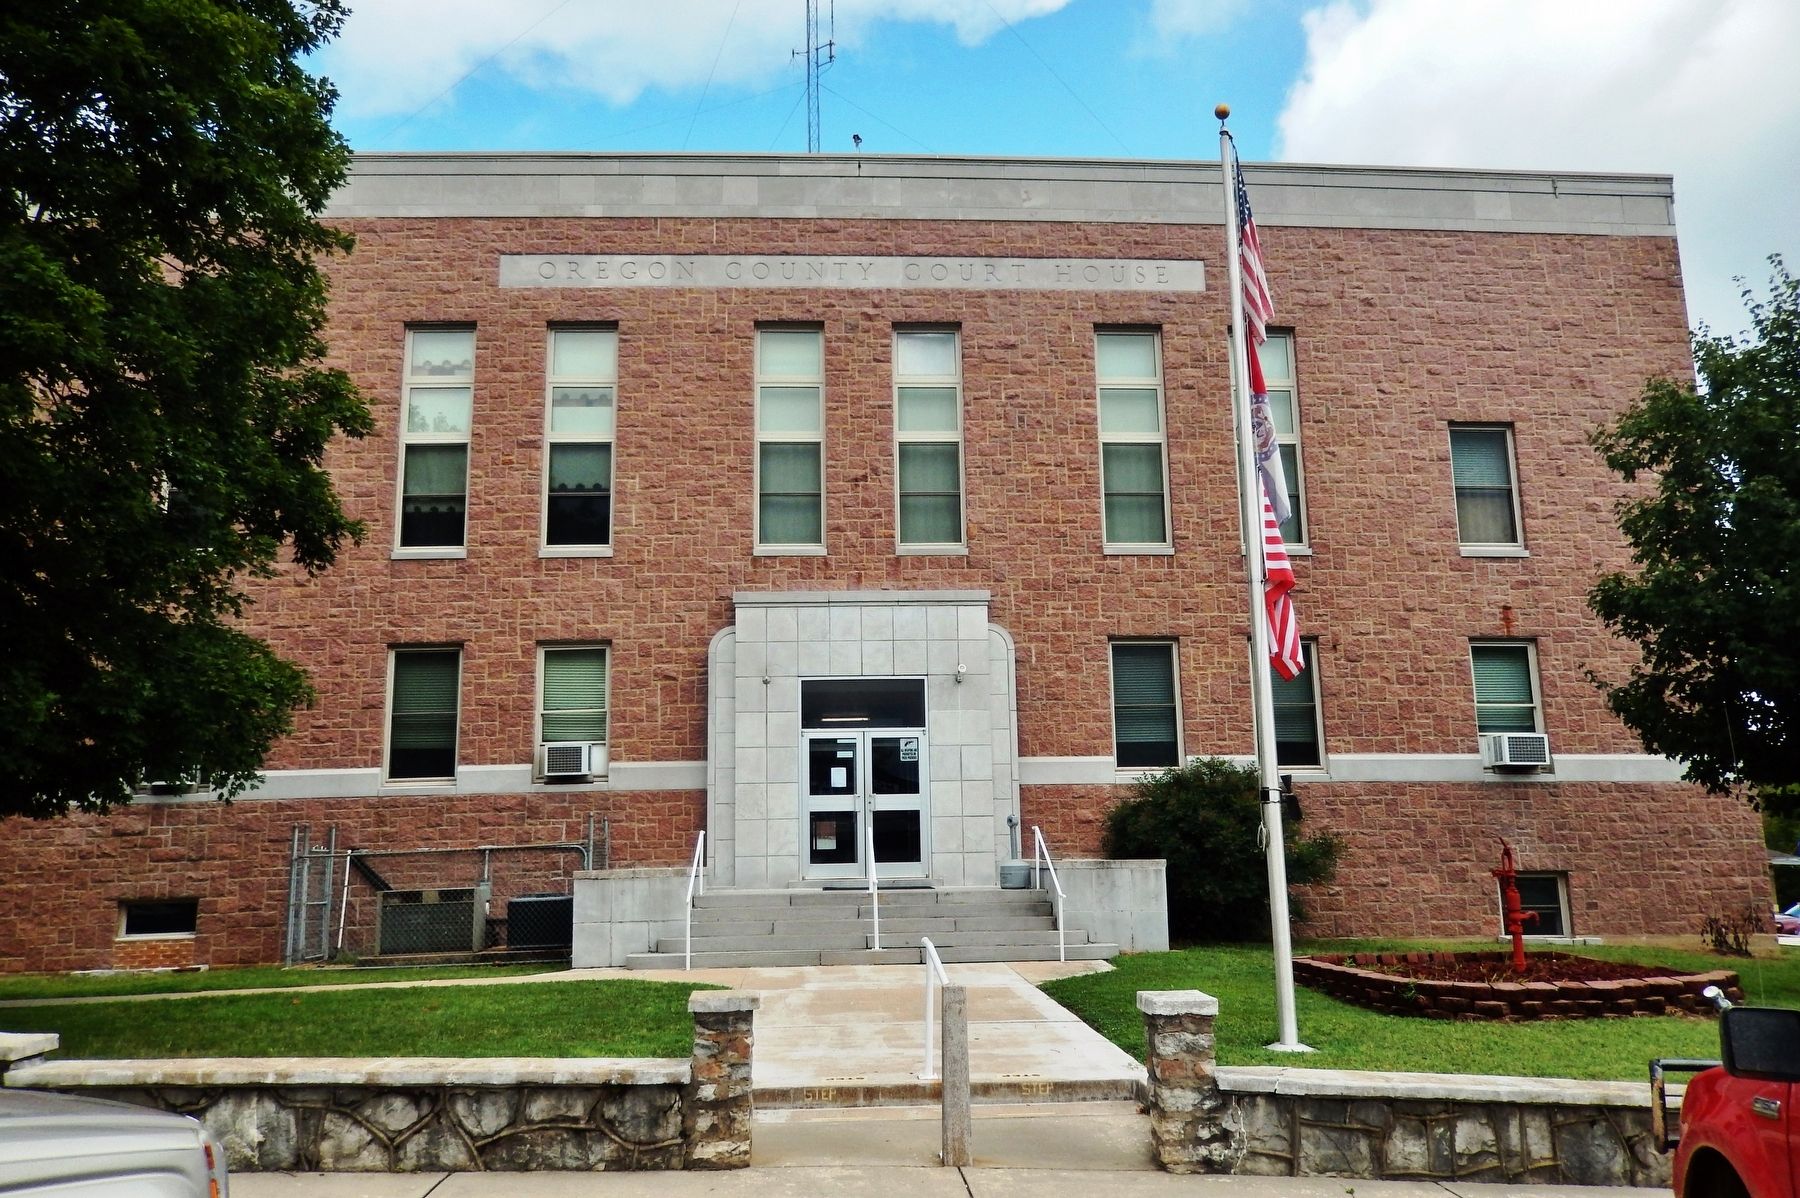 Ripley County Courthouse